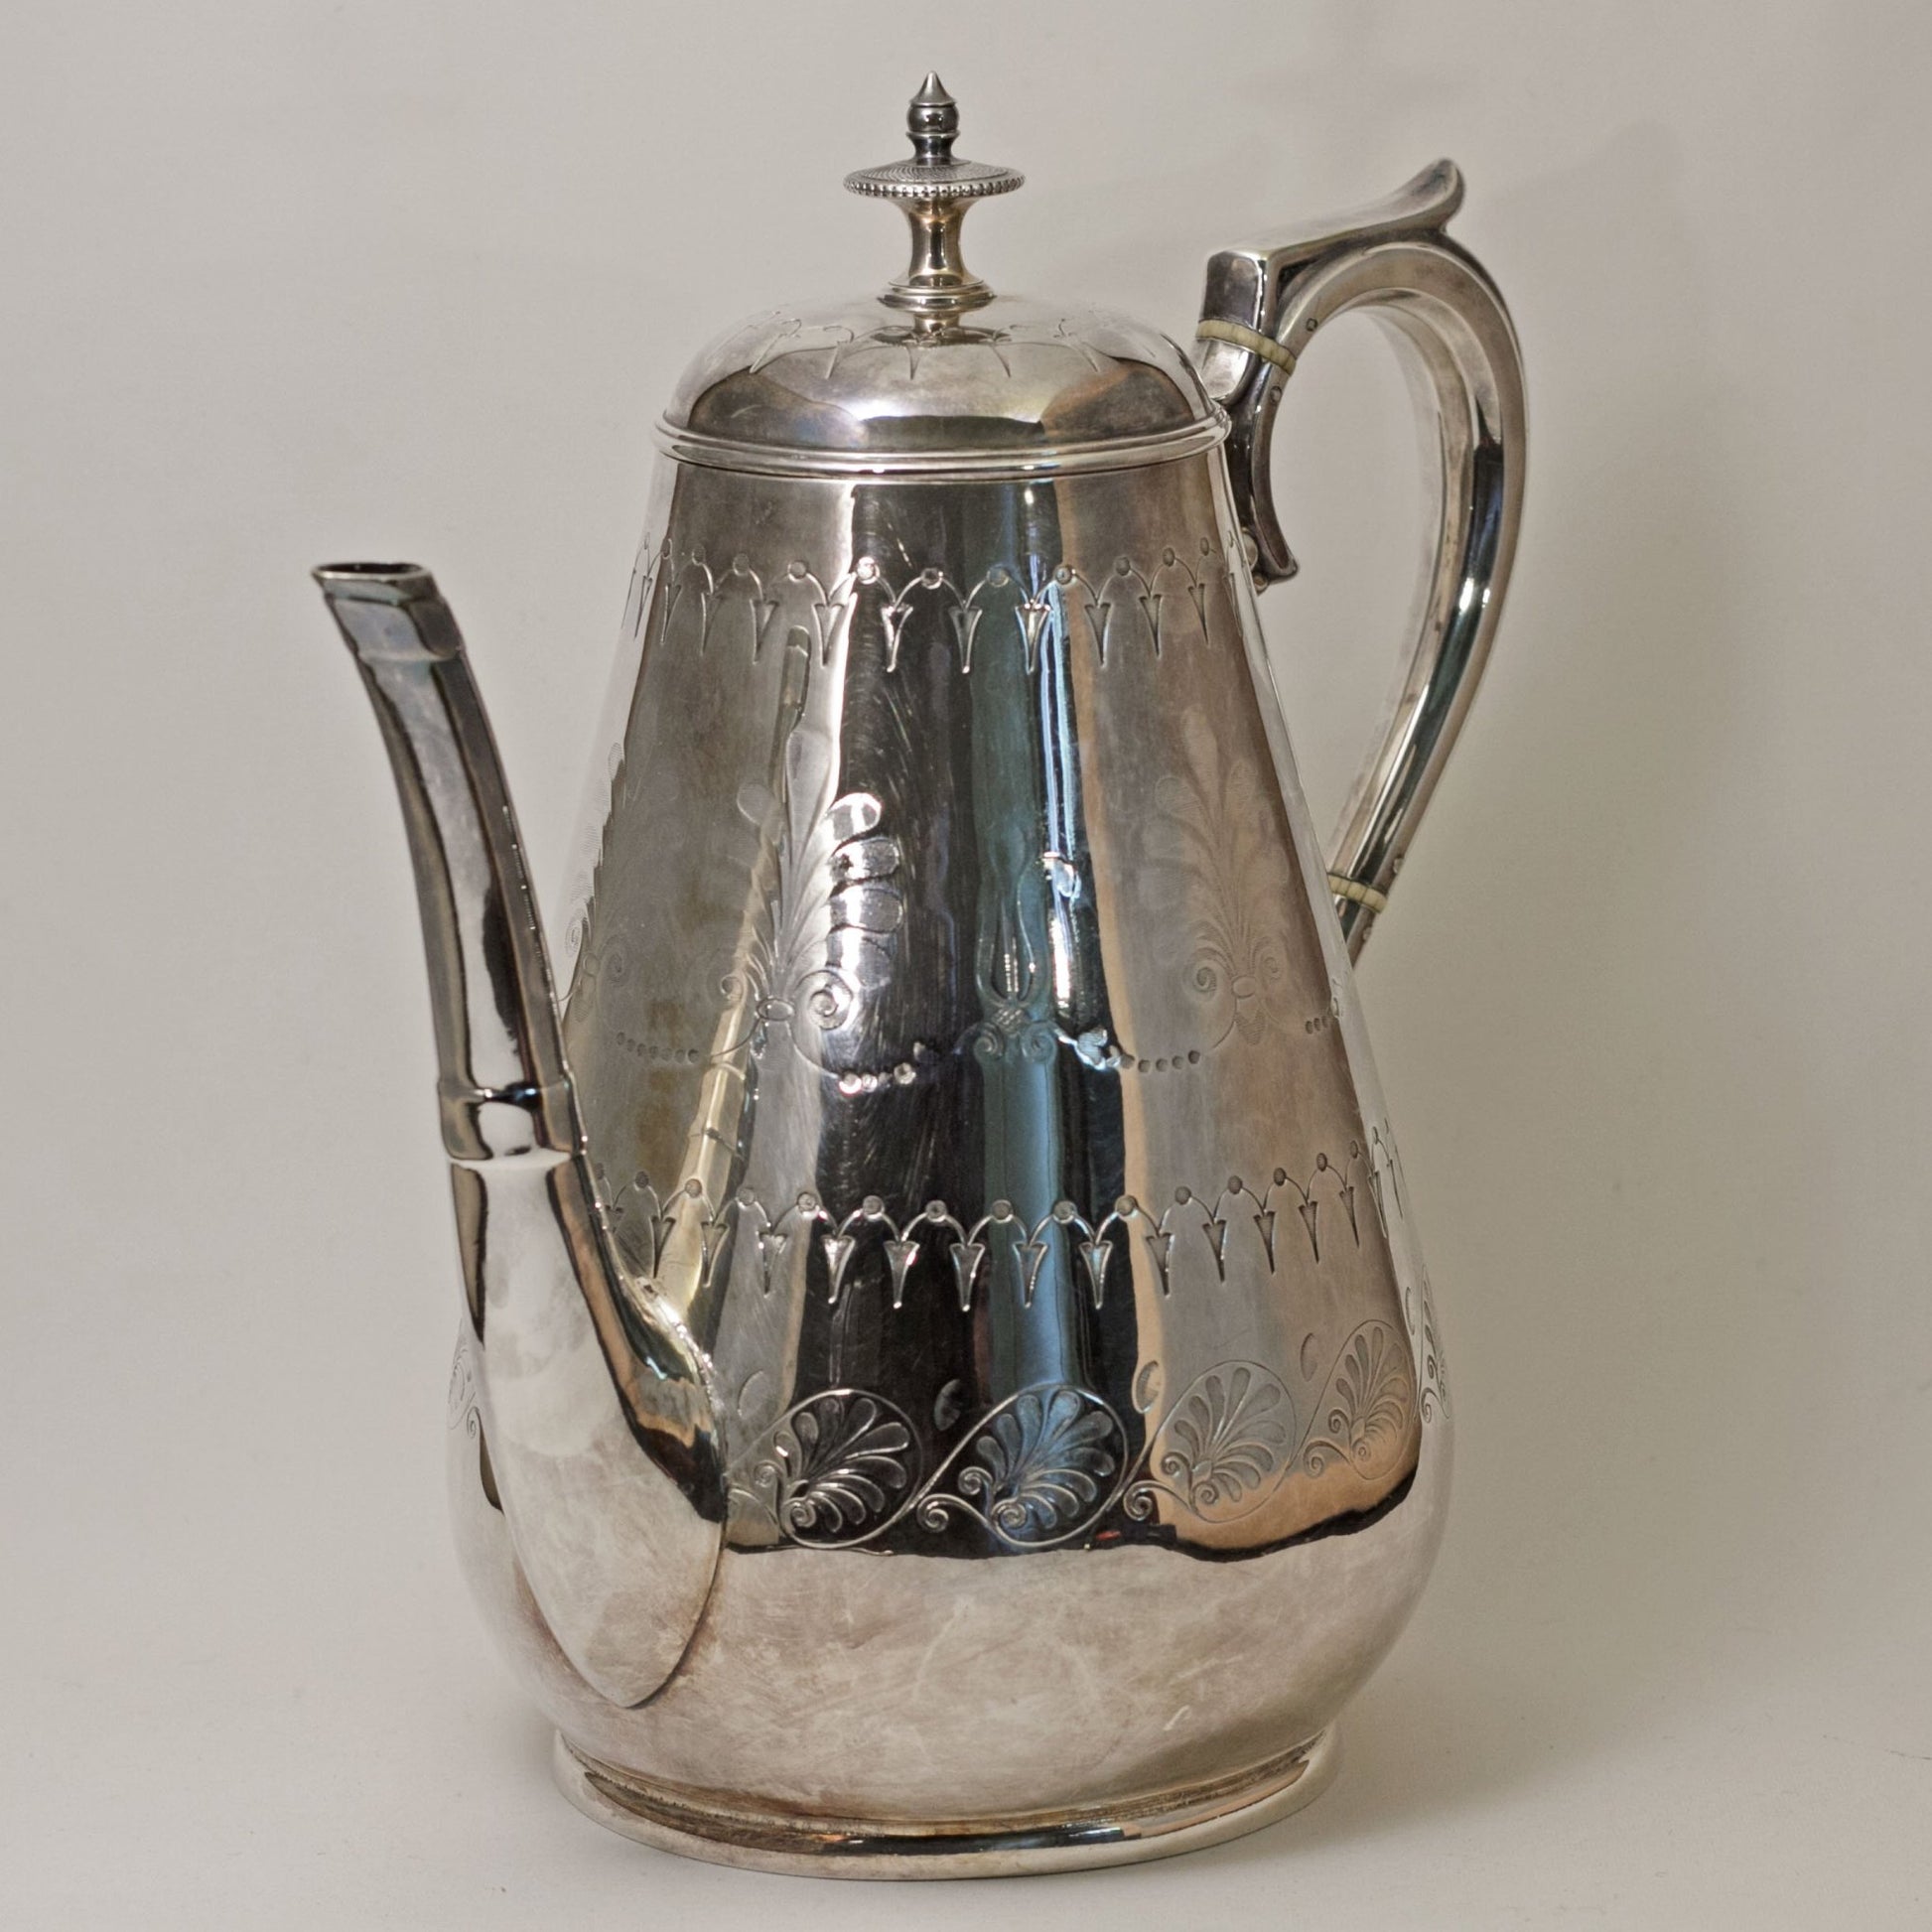 ENGRAVED ELECTROPLATED VICTORIAN COFFEEE POT